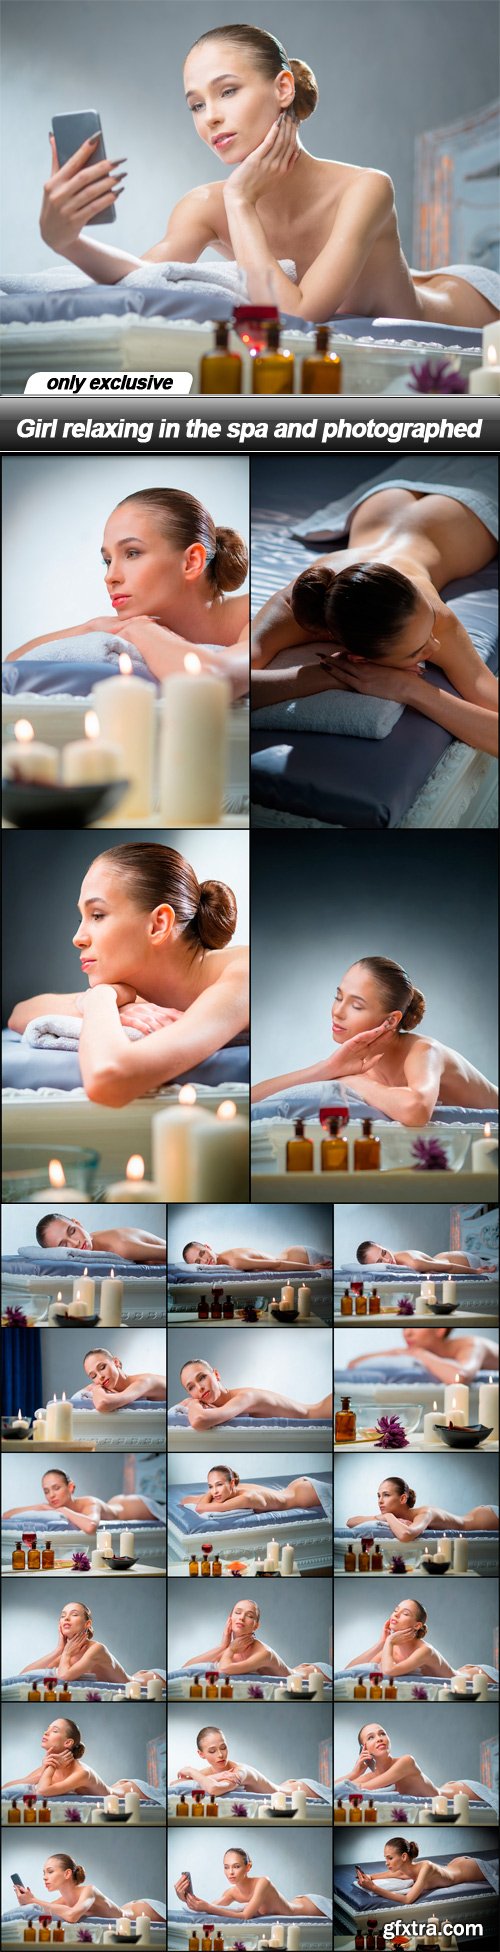 Girl relaxing in the spa and photographed - 23 UHQ JPEG